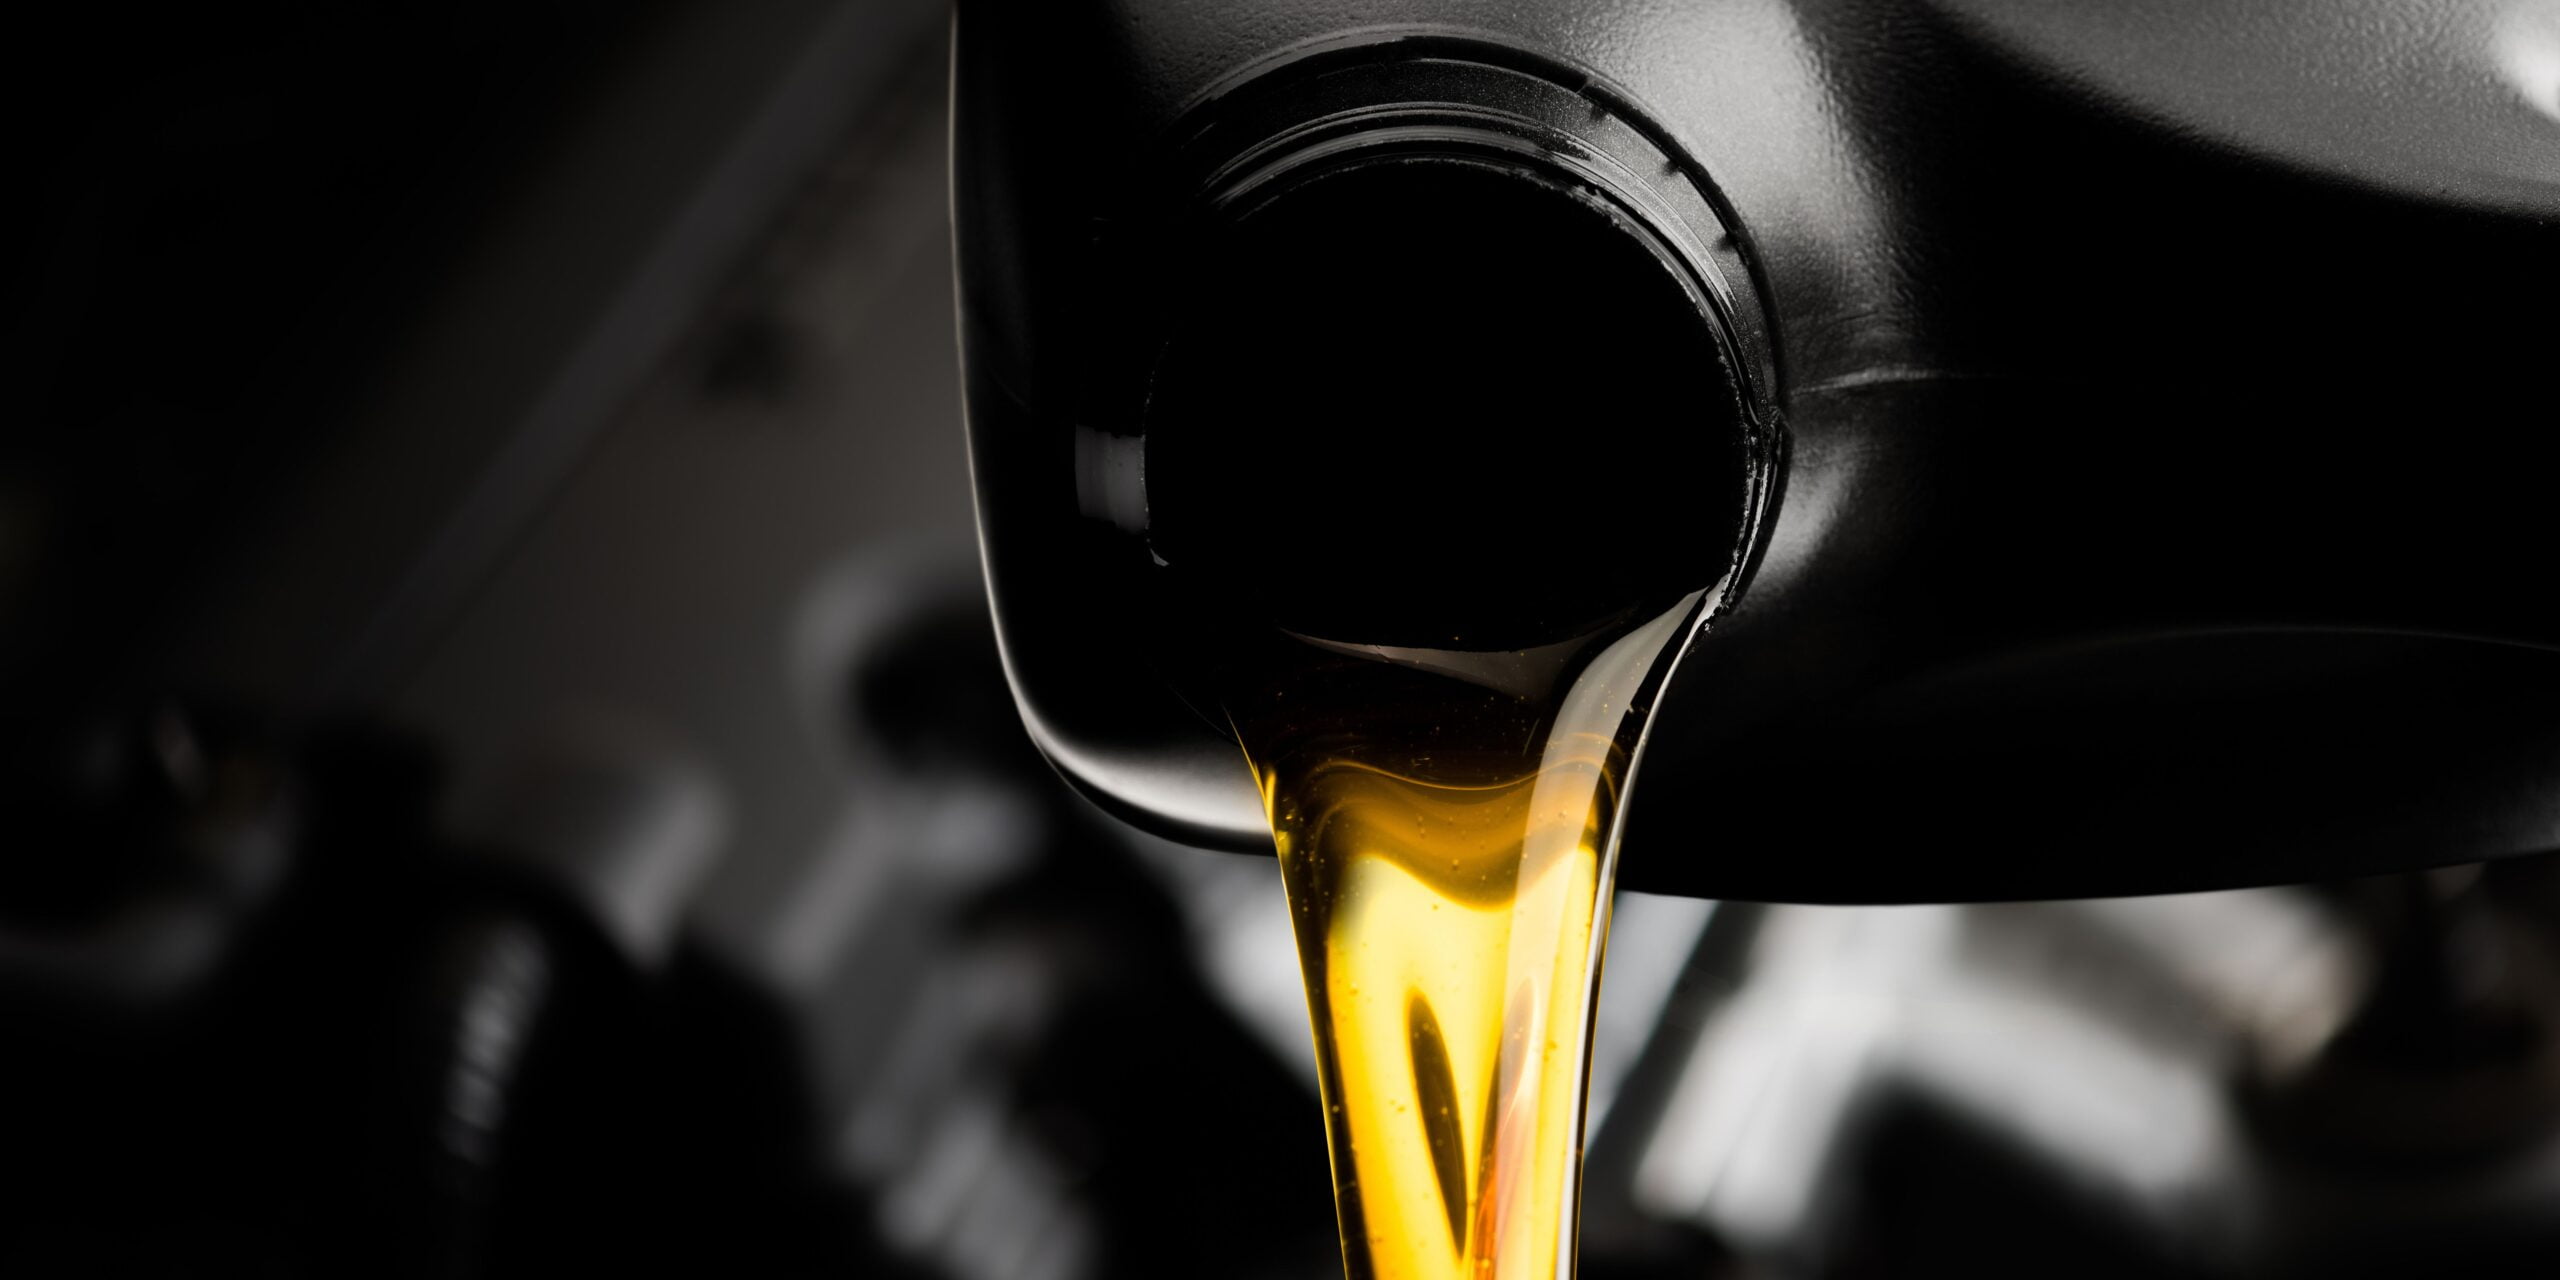 Golden motor oil being poured from a black plastic container.